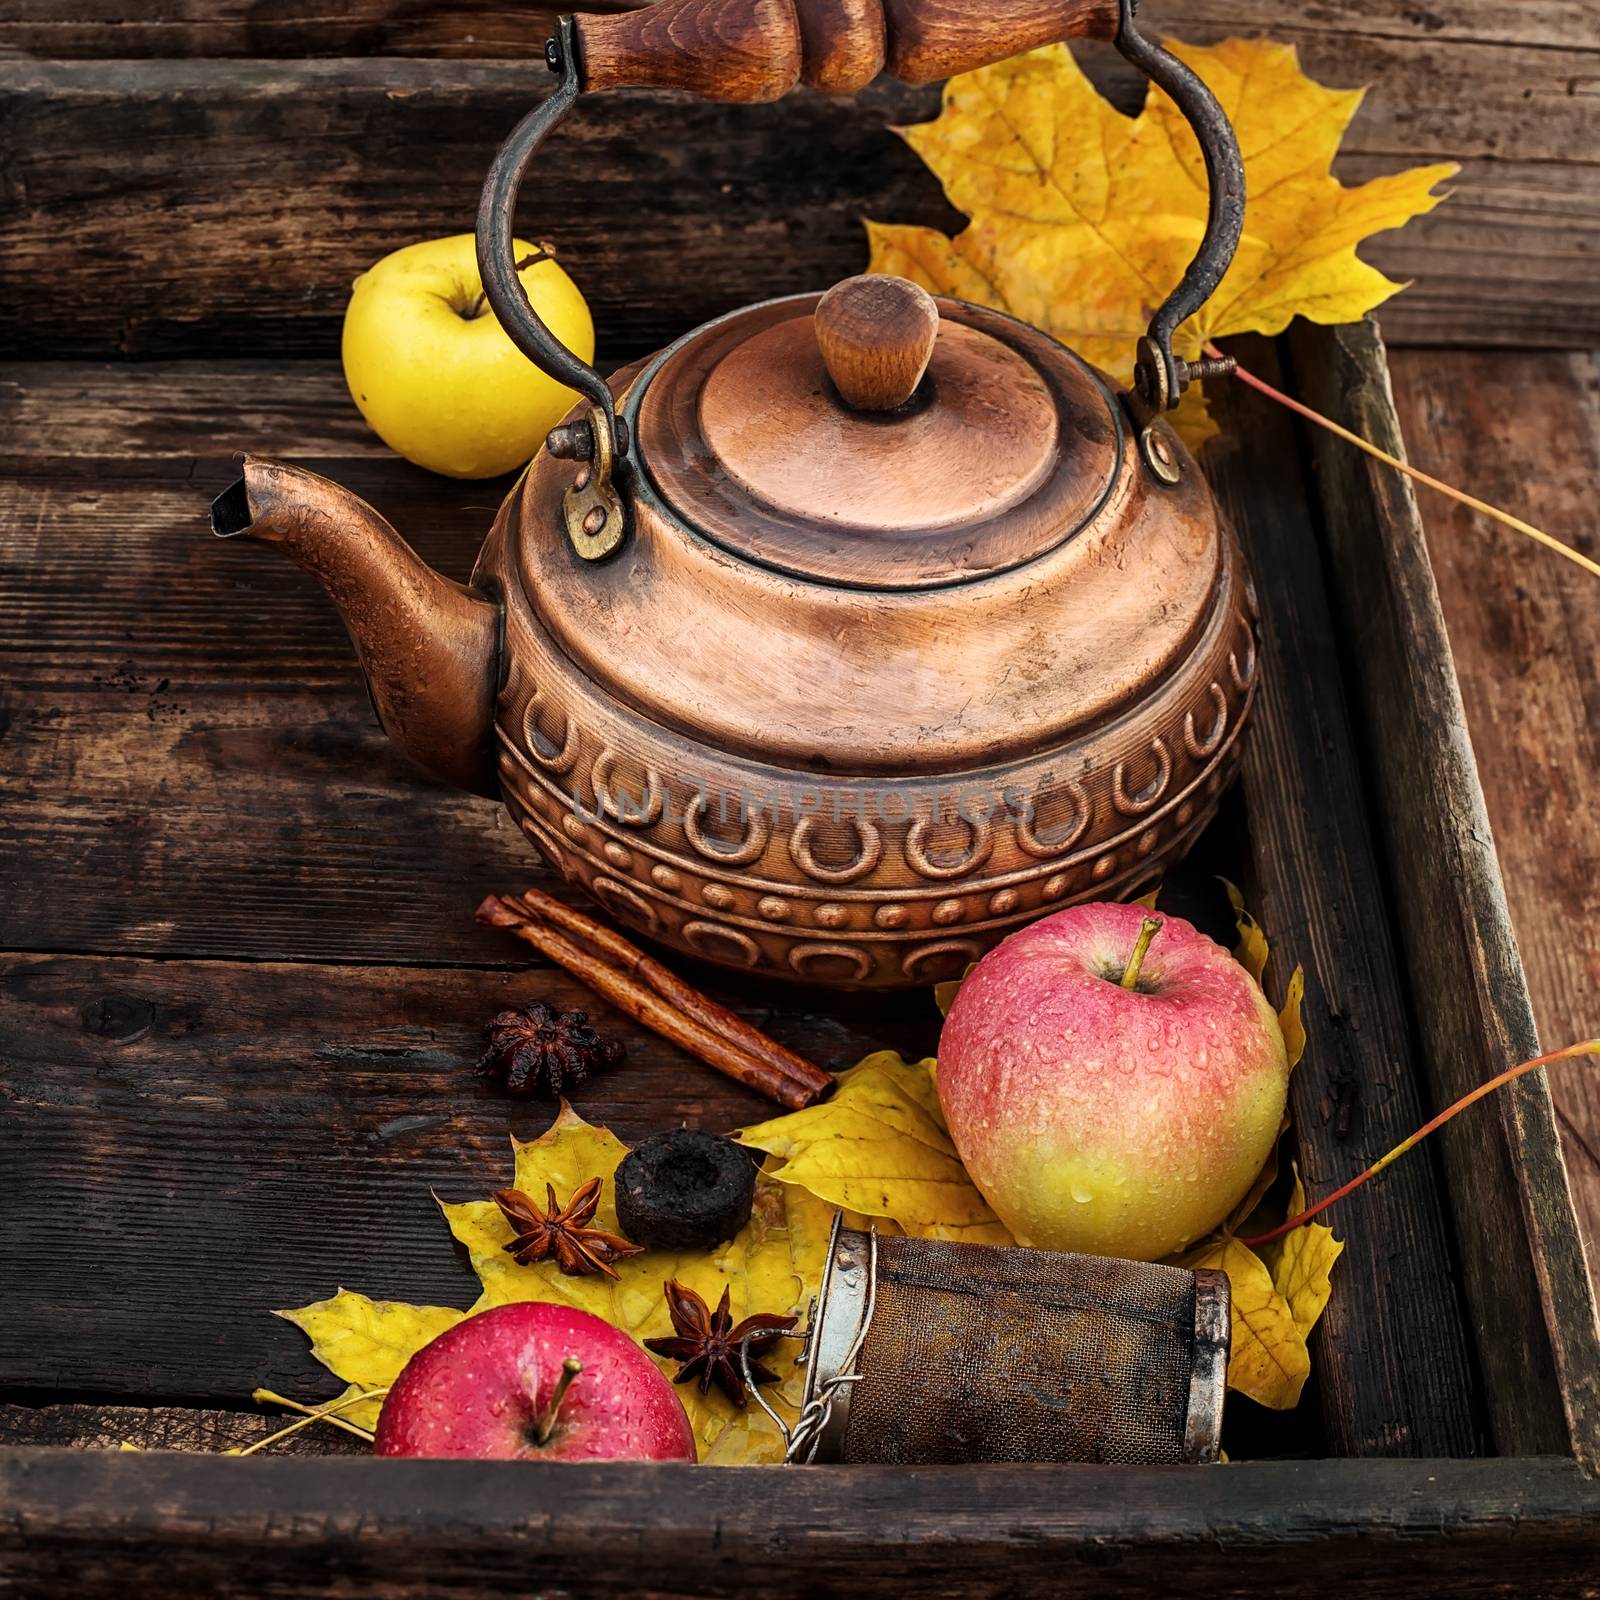 Copper kettle and autumn leaf fall by LMykola